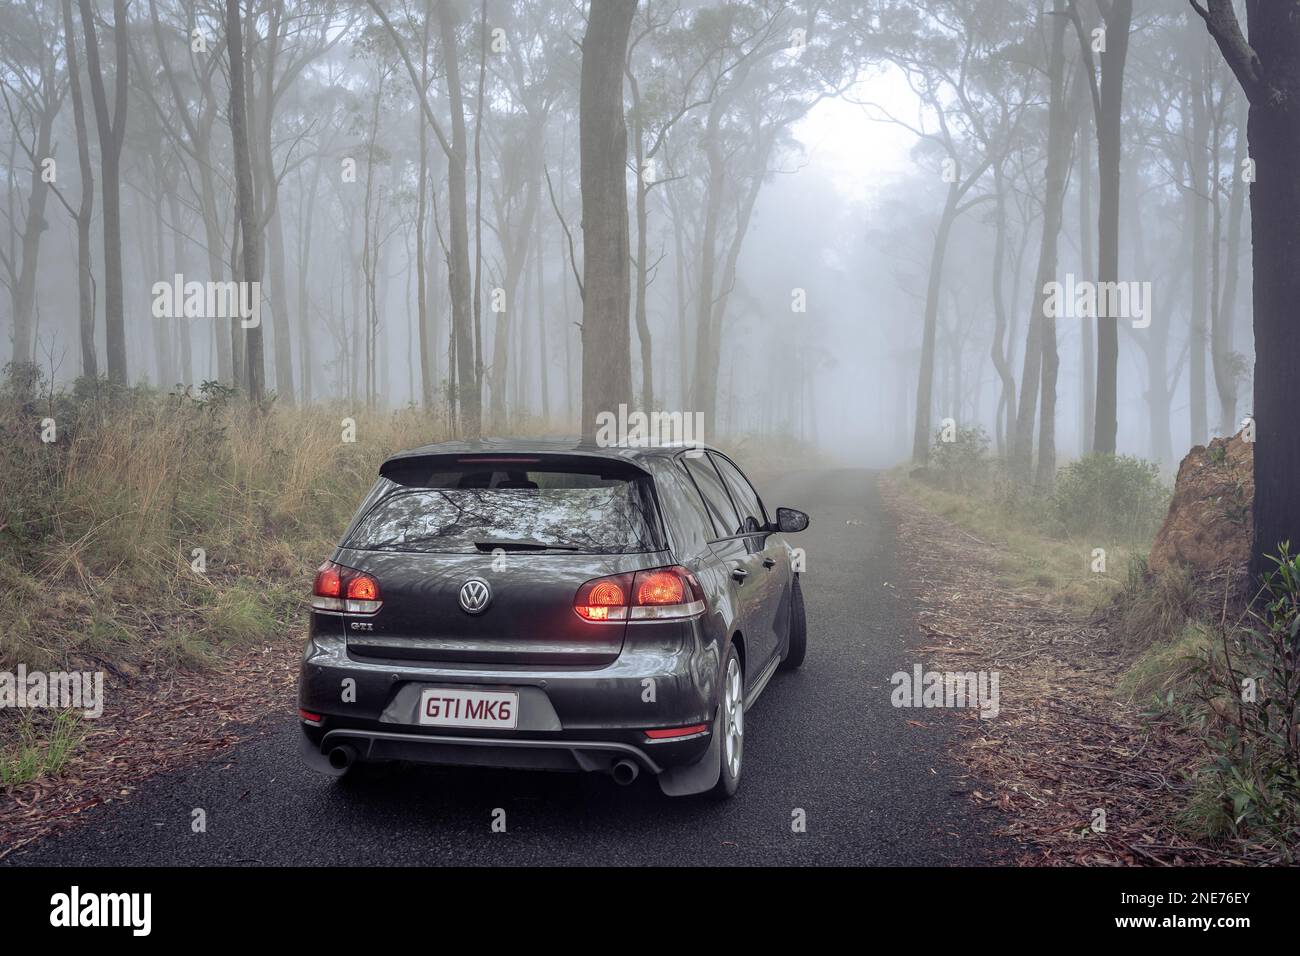 New South Whales, Australia - Volkswagen Golf GTI MKVI parked in a foggy forest Stock Photo